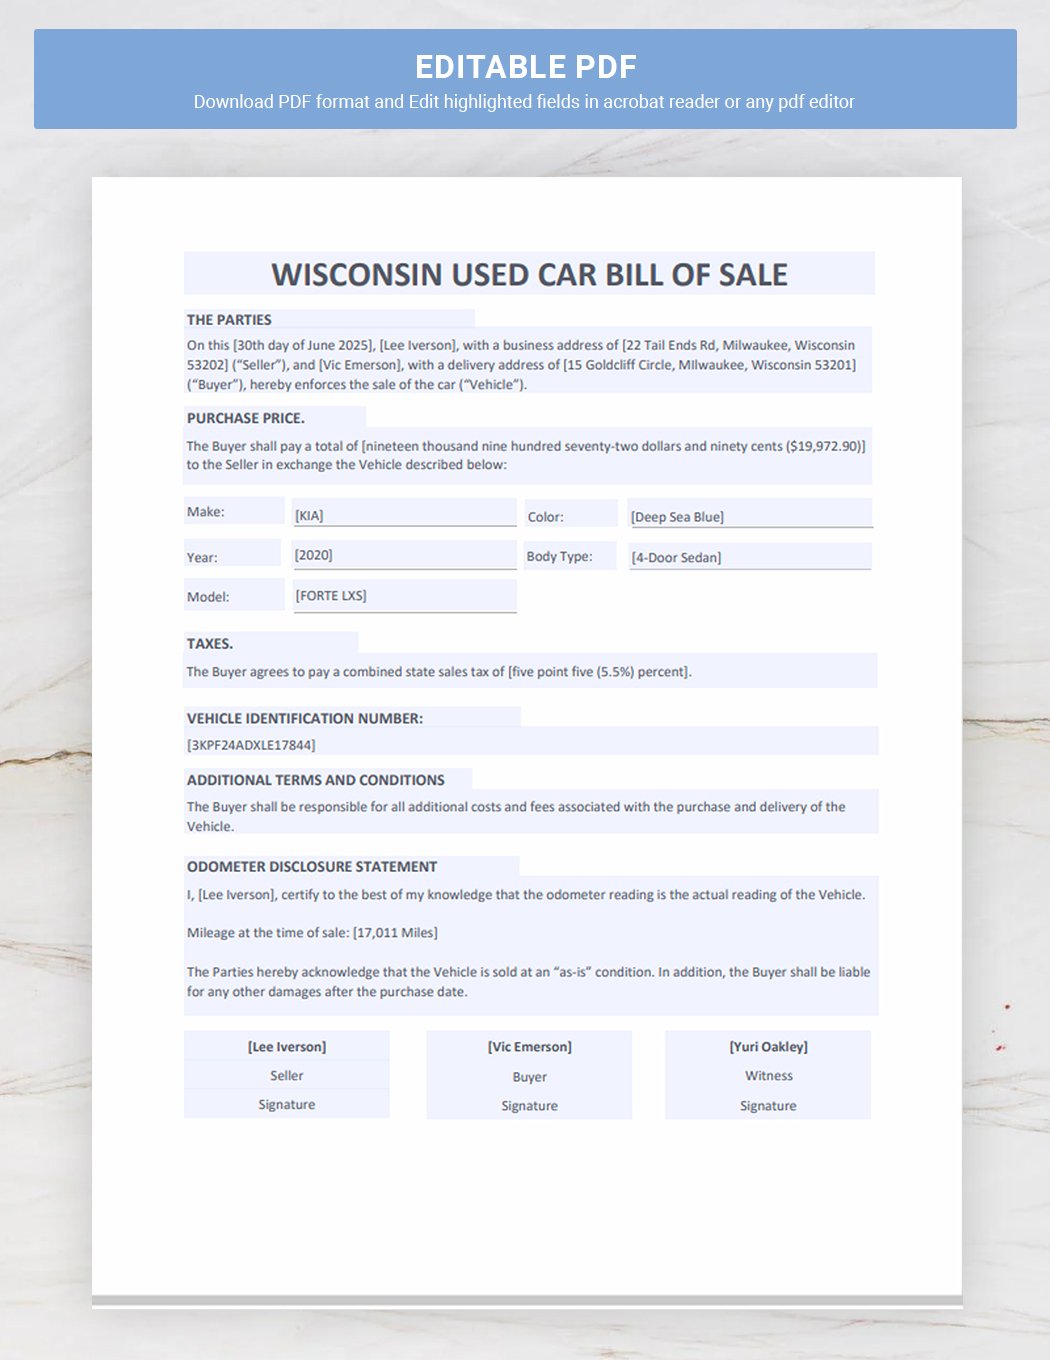 Wisconsin Used Car Bill of Sale Template Download in Word, Google